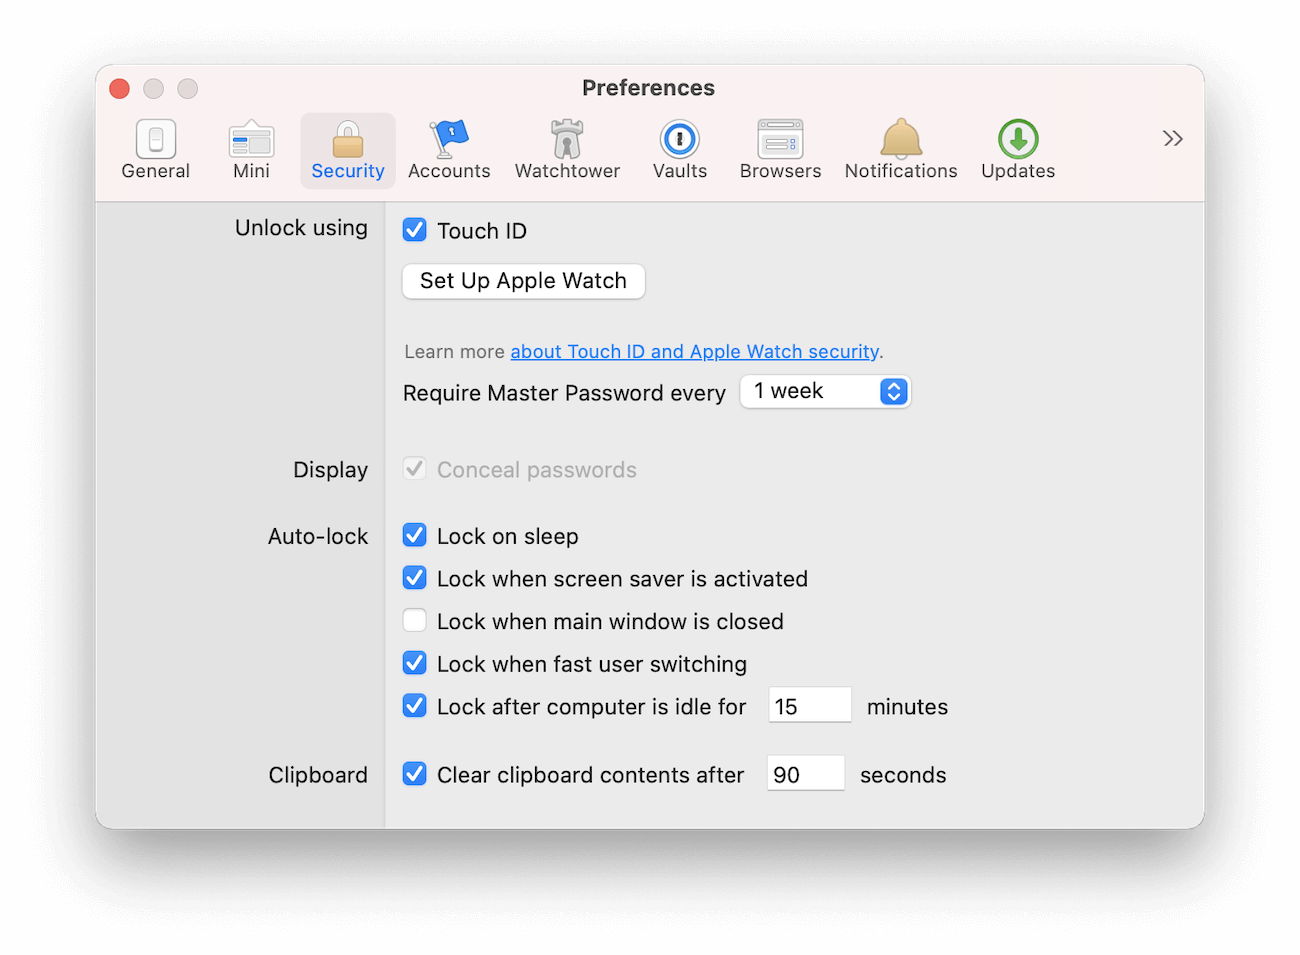 1Password for Mac preferences window with new option to set up Apple Watch highlighted